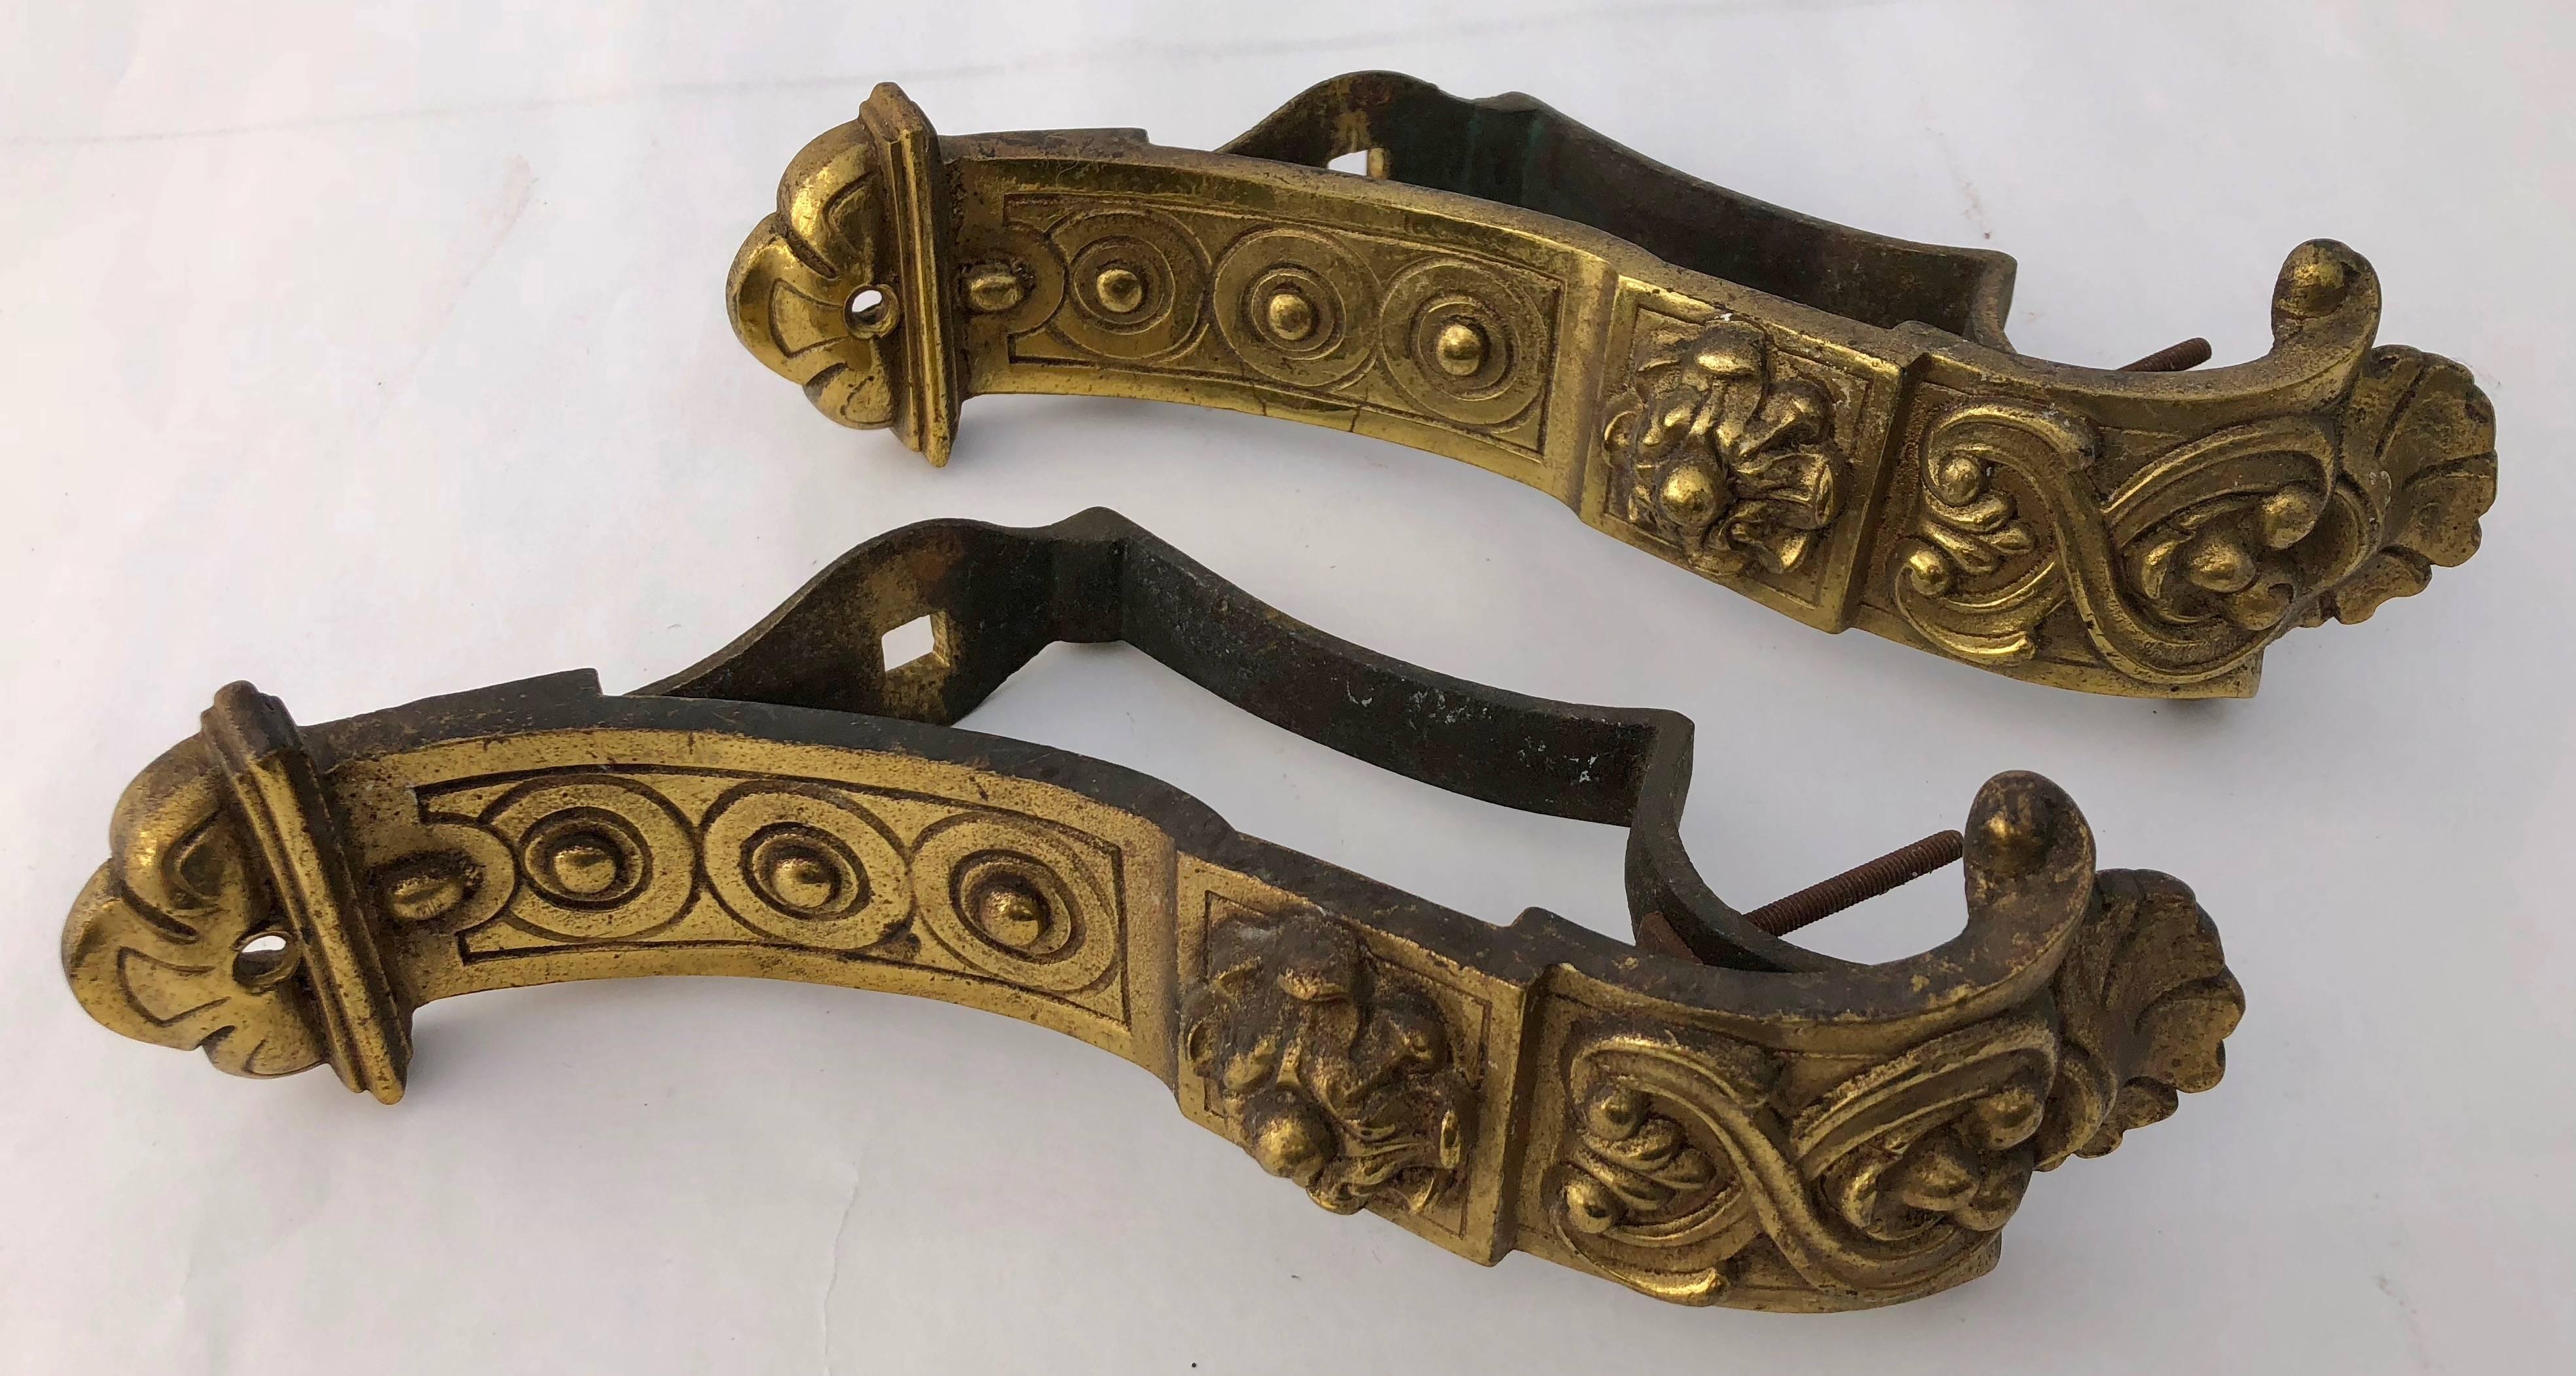 These are a set of two intricately detailed French brass, heavy curtain rod brackets from the 1800s. They come with their full rear mounting supports and have a gorgeous design of scrolls and rings. Adding these to any room would provide a stunning